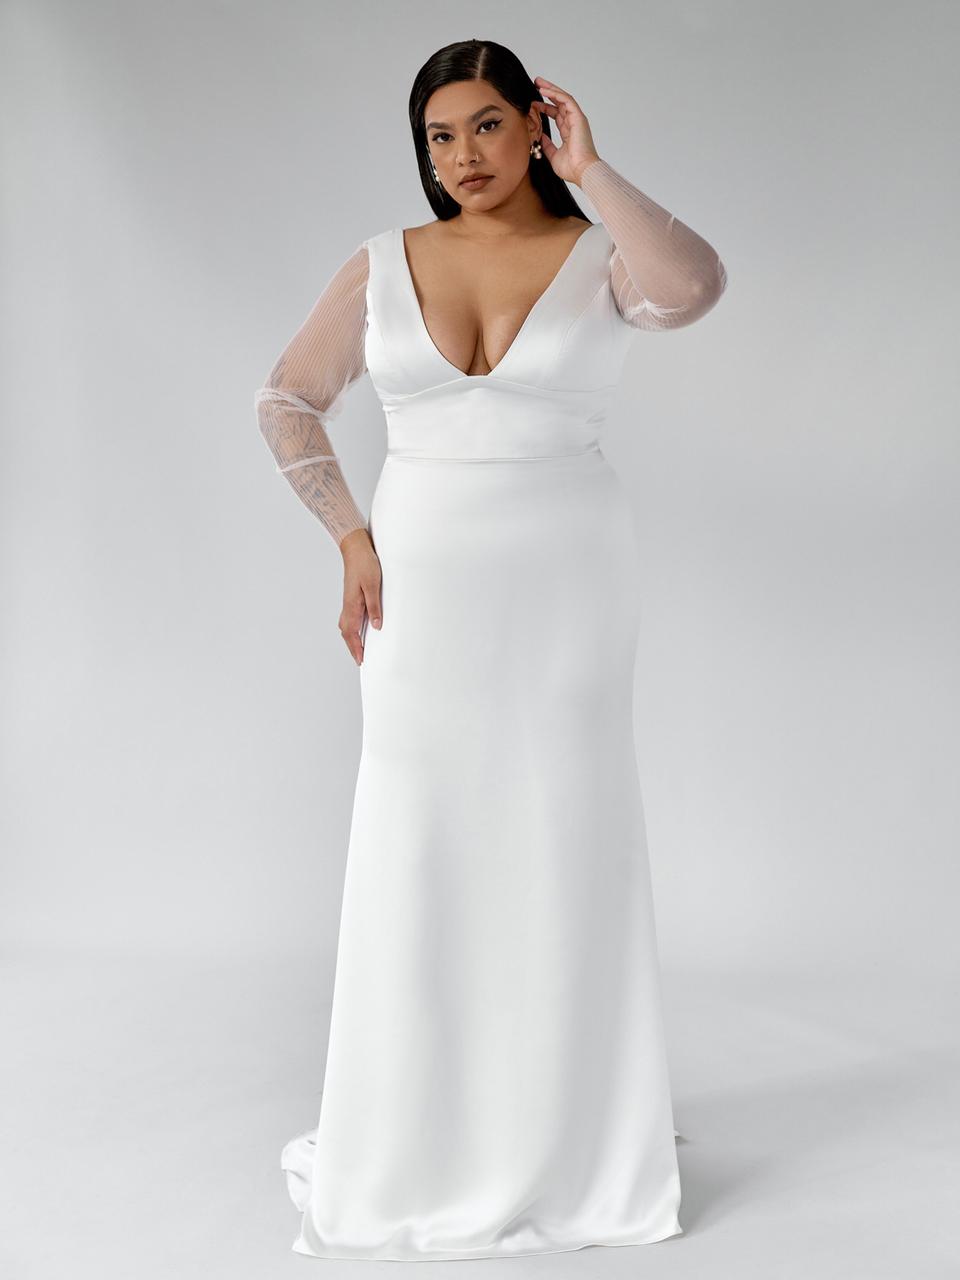 31 Plus Size Wedding Dress and Curvy Bridal Gowns - hitched.co.uk ...